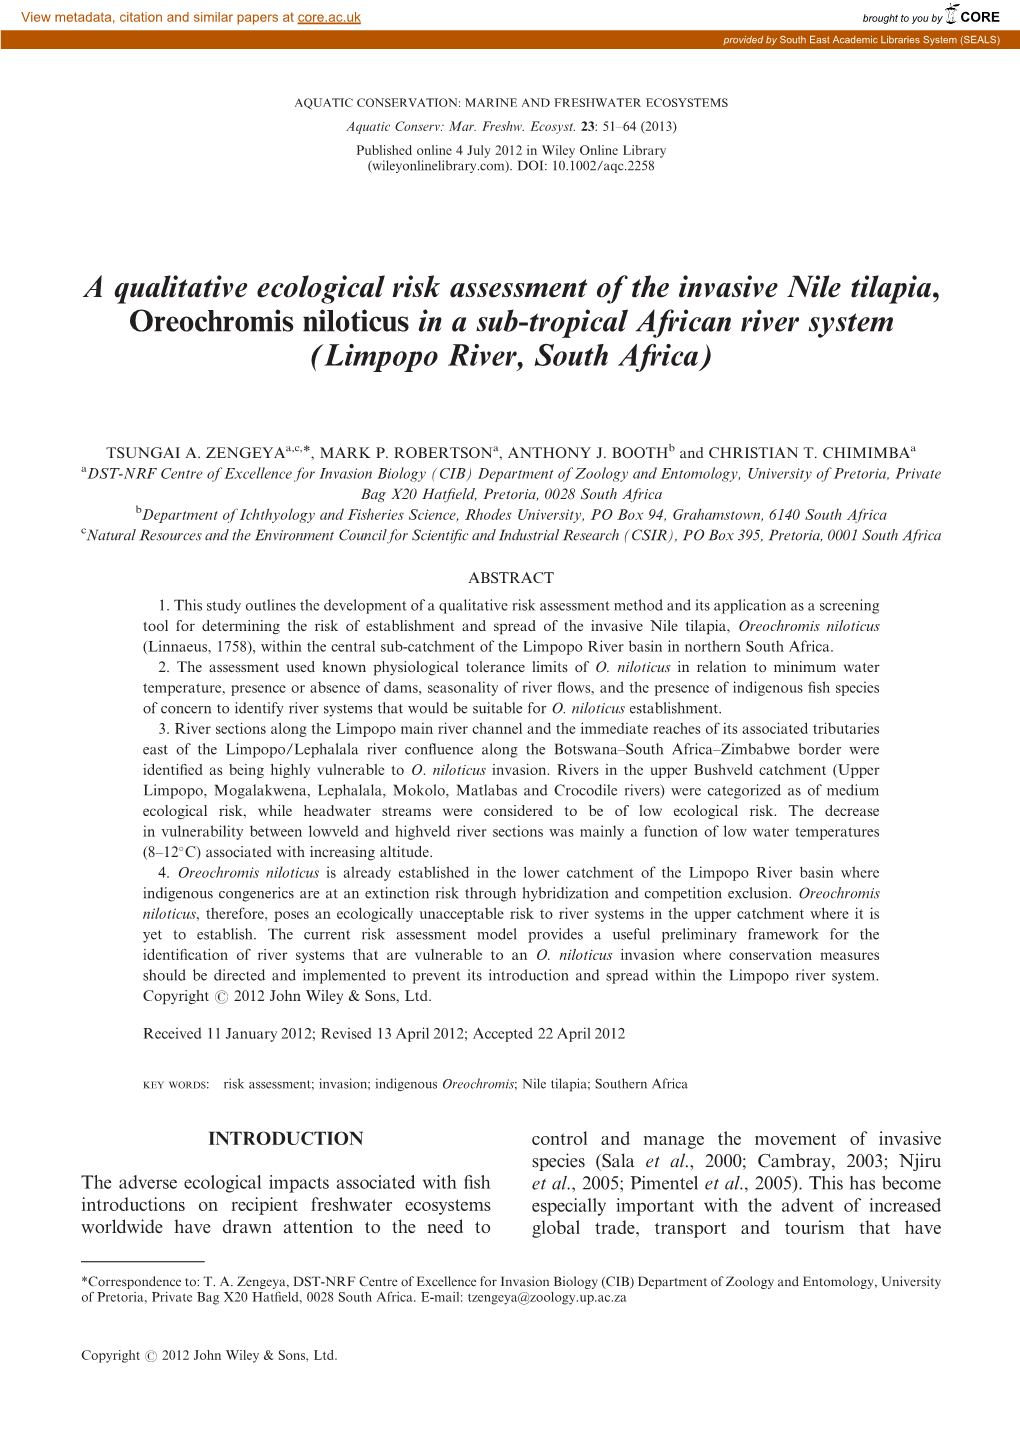 A Qualitative Ecological Risk Assessment of the Invasive Nile Tilapia, Oreochromis Niloticus in a Sub‐Tropical African River S